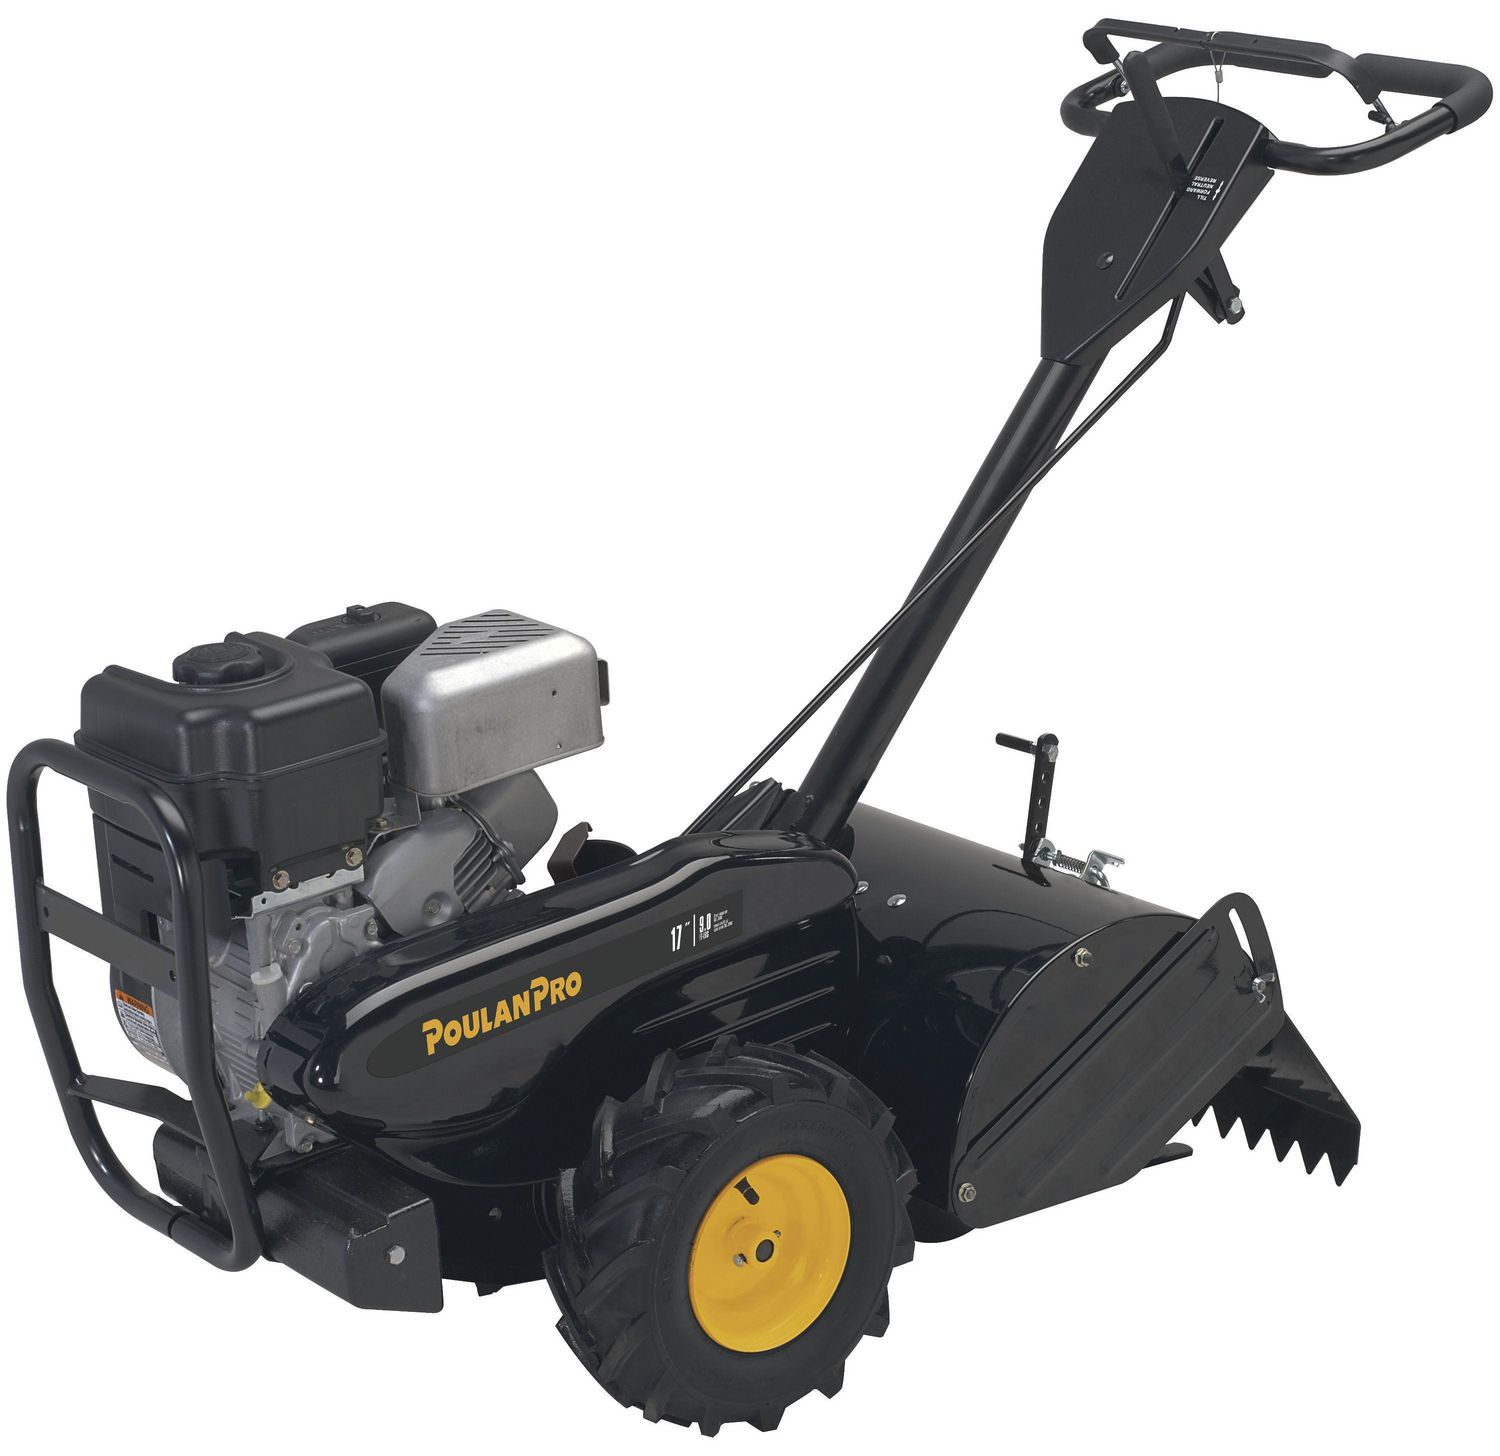 Image of Poulan Pro 16-inch Electric Tiller with 6 Tines